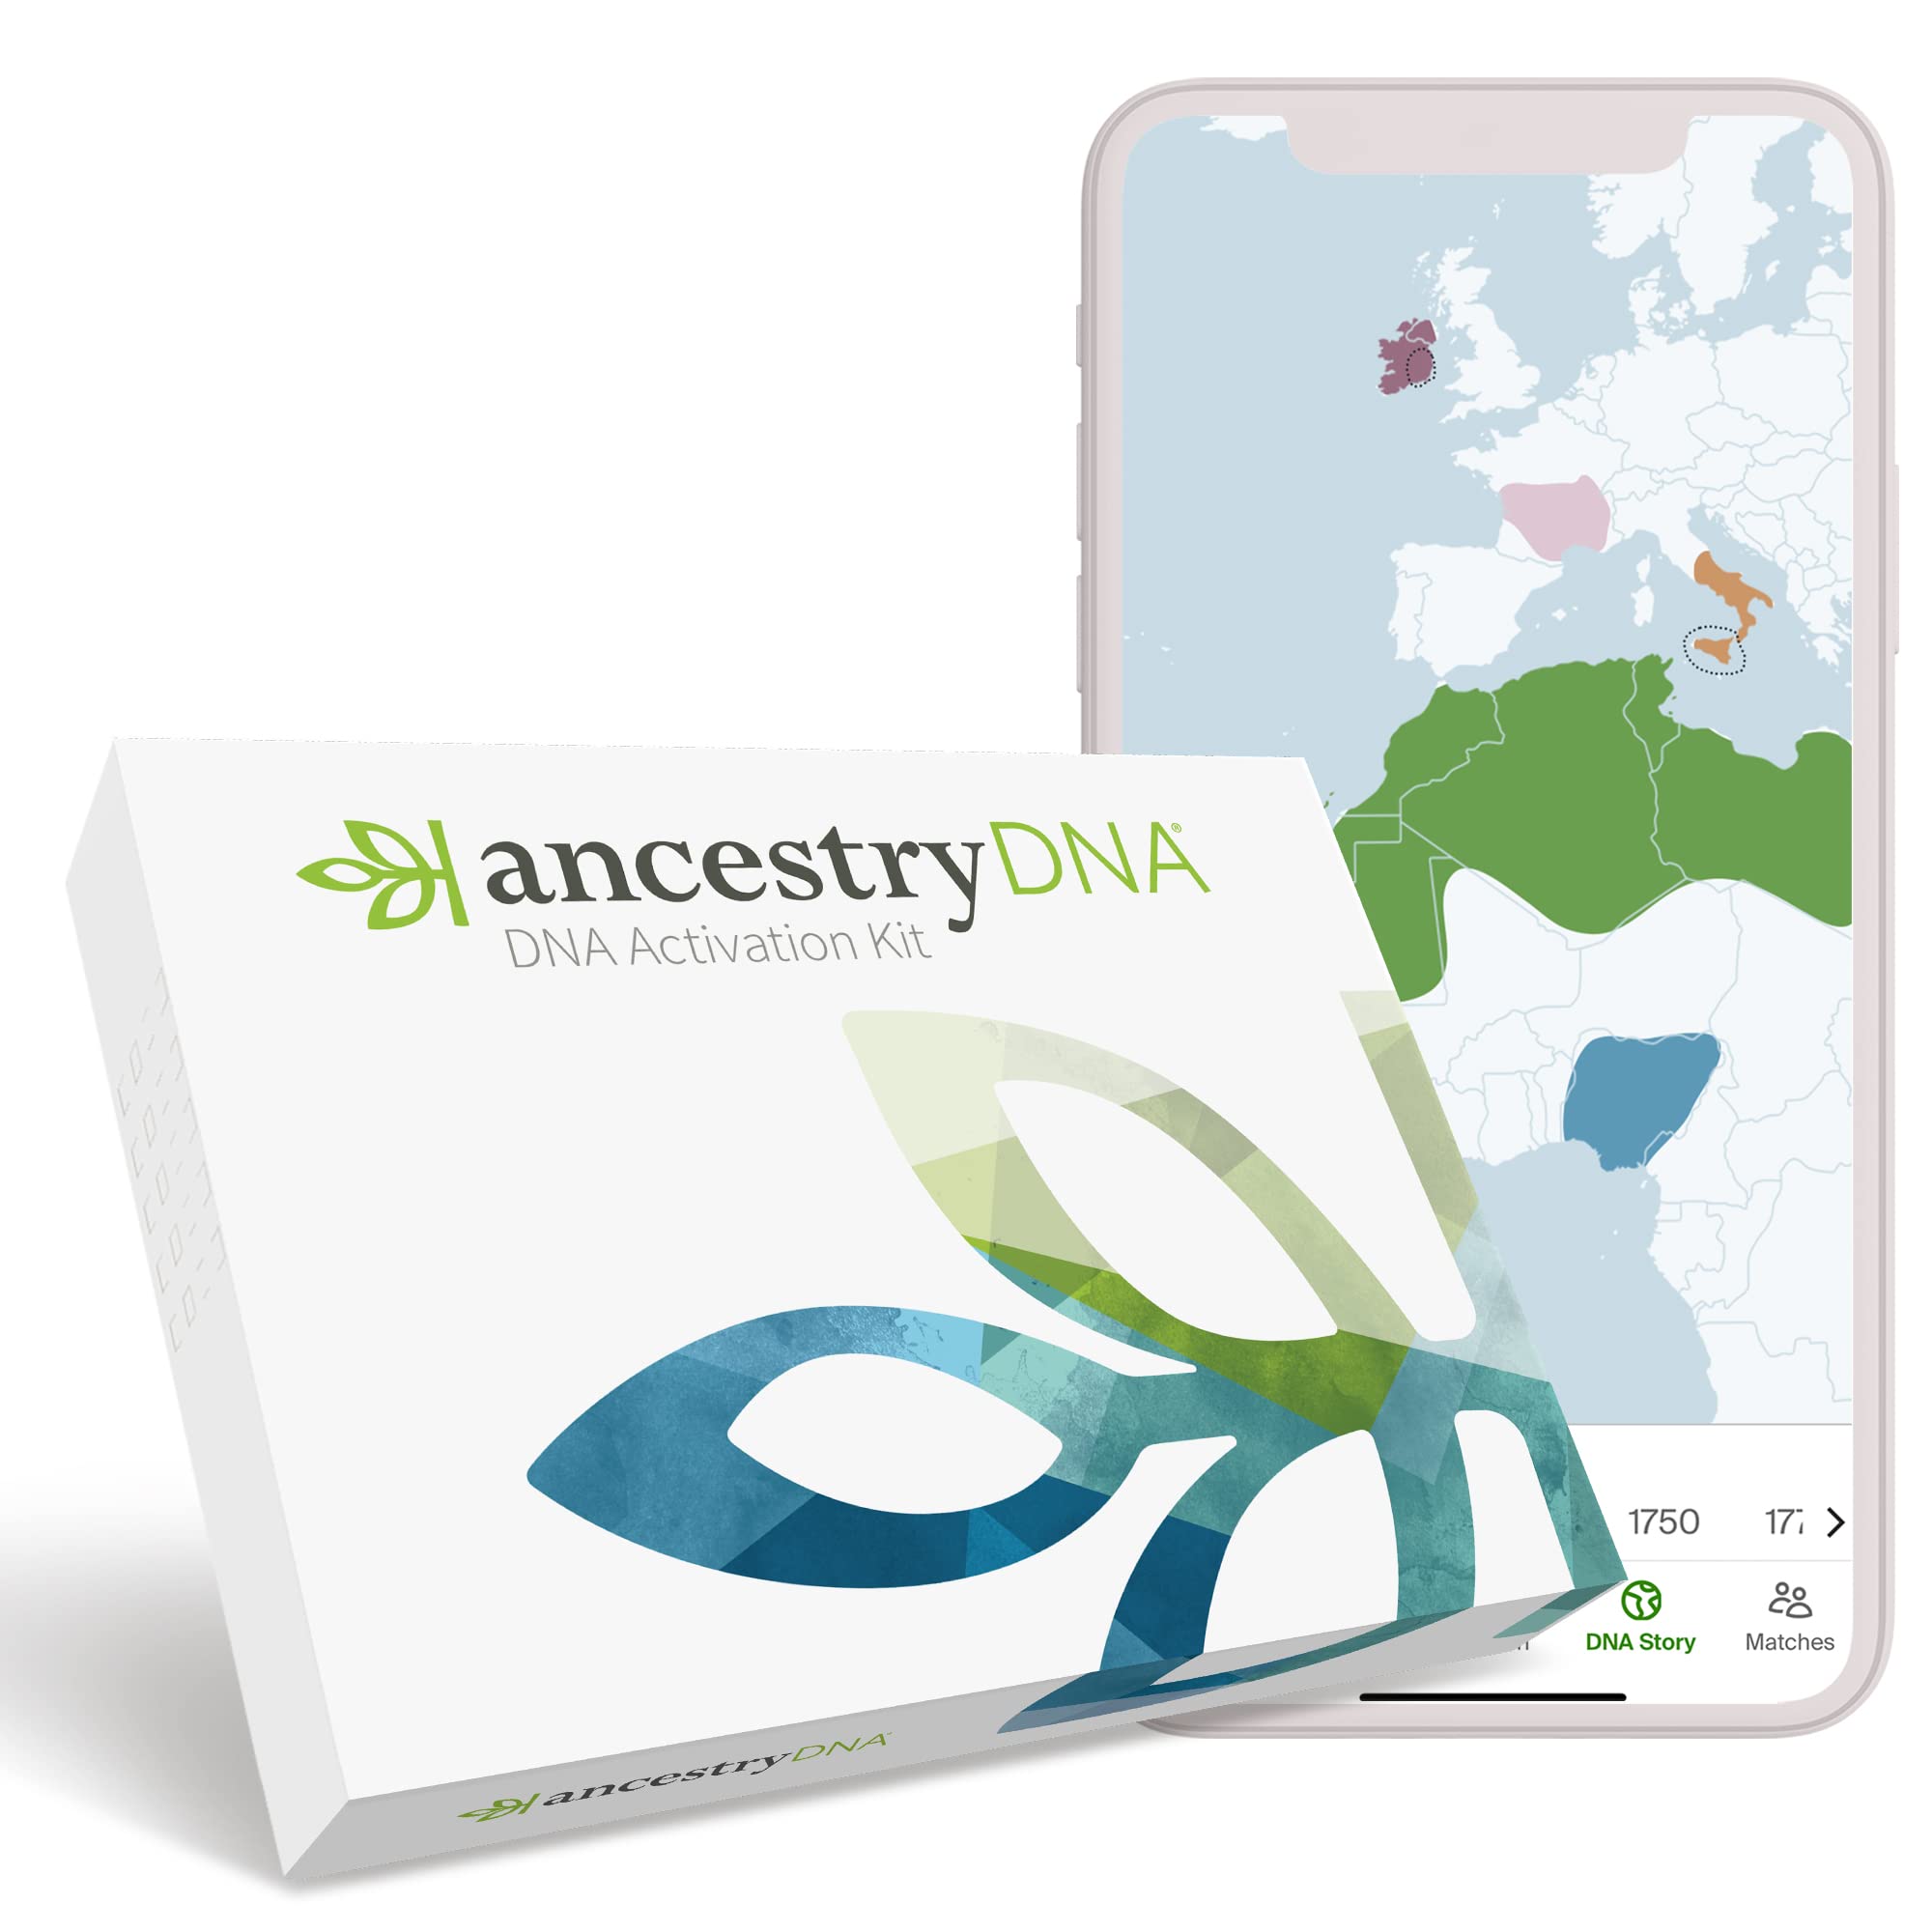 AncestryDNA® gives you much more than just the places you're from. With clear-cut historical insights and rich geographic details, we connect you to the places in the world where your story started – and you might even discover living relatives.